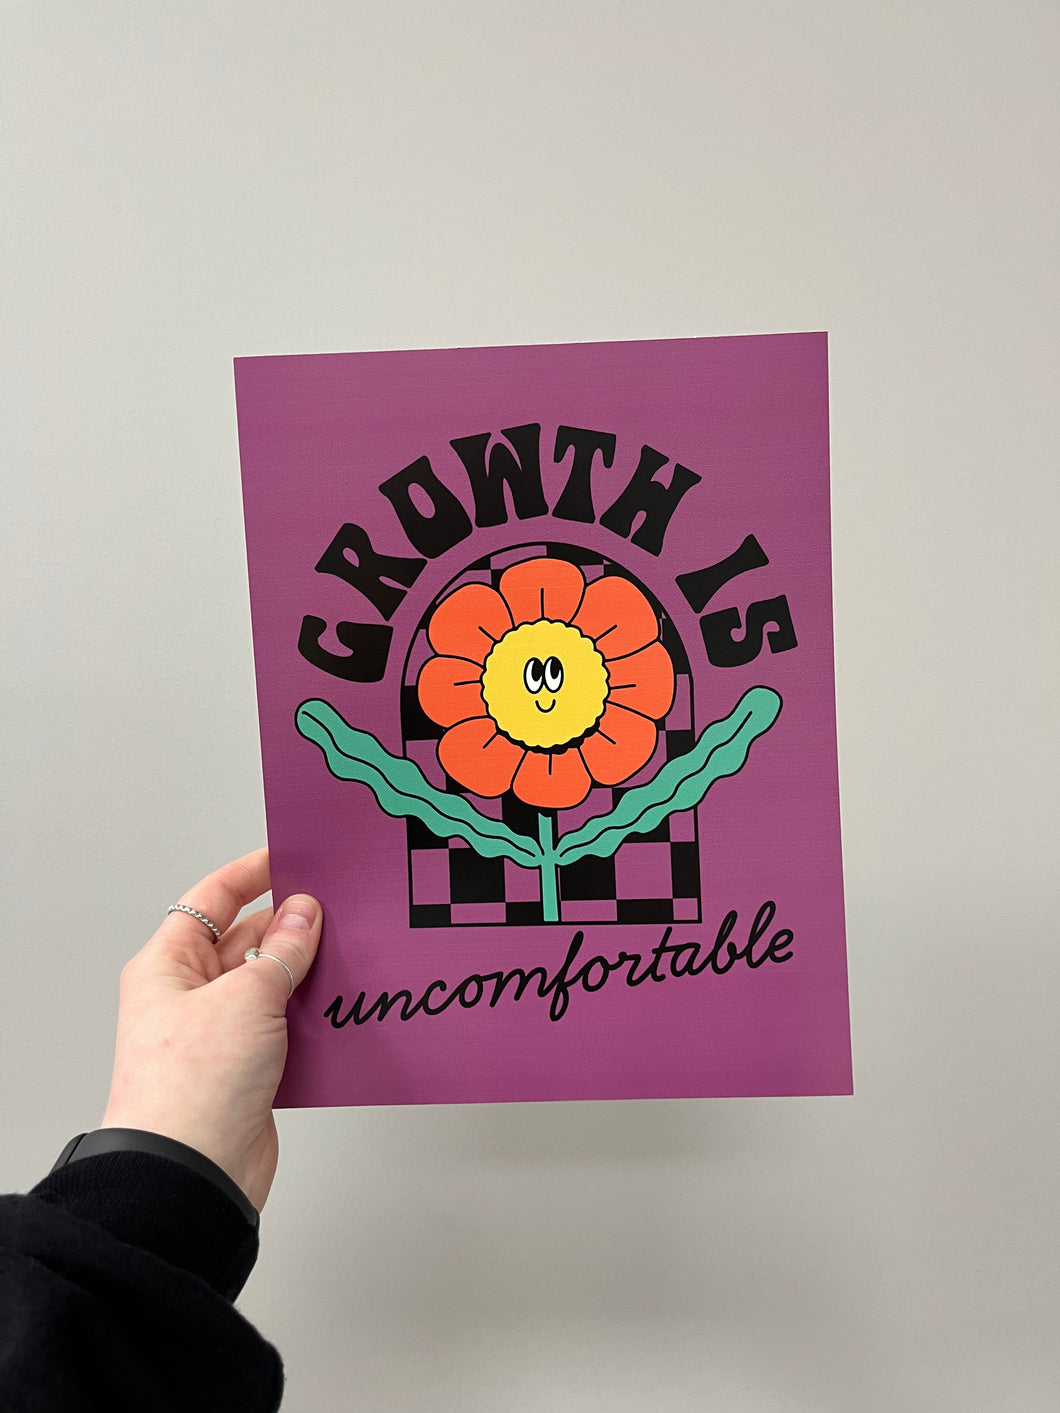 growth is uncomfortable - poster